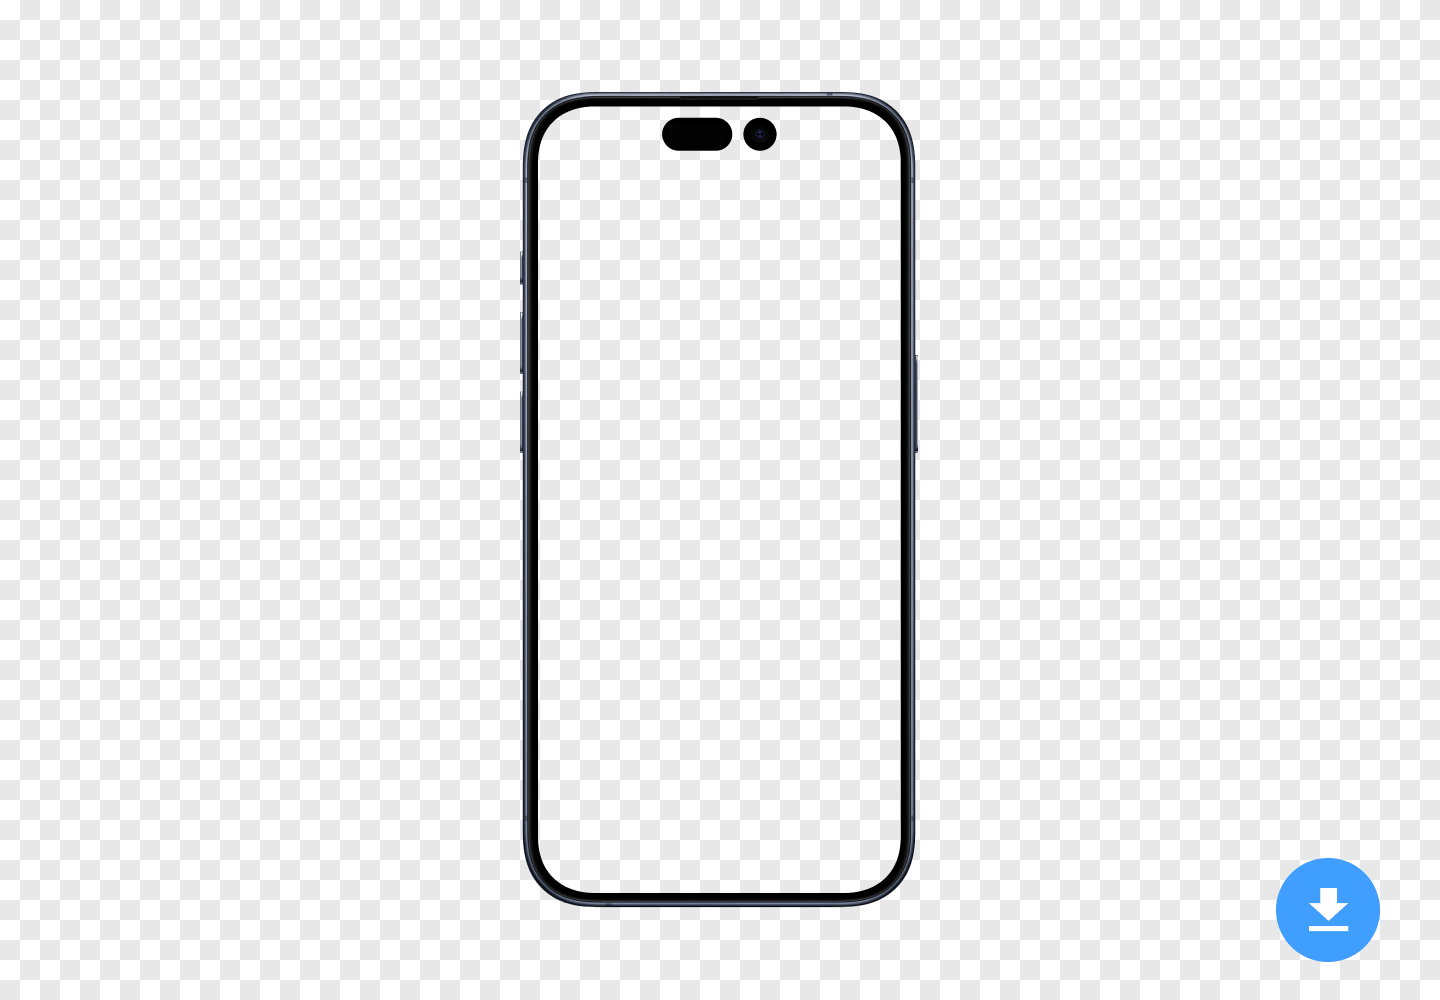 Free HD mockup of Apple iPhone 15 PRO (2023) in PNG and PSD image format with transparent background